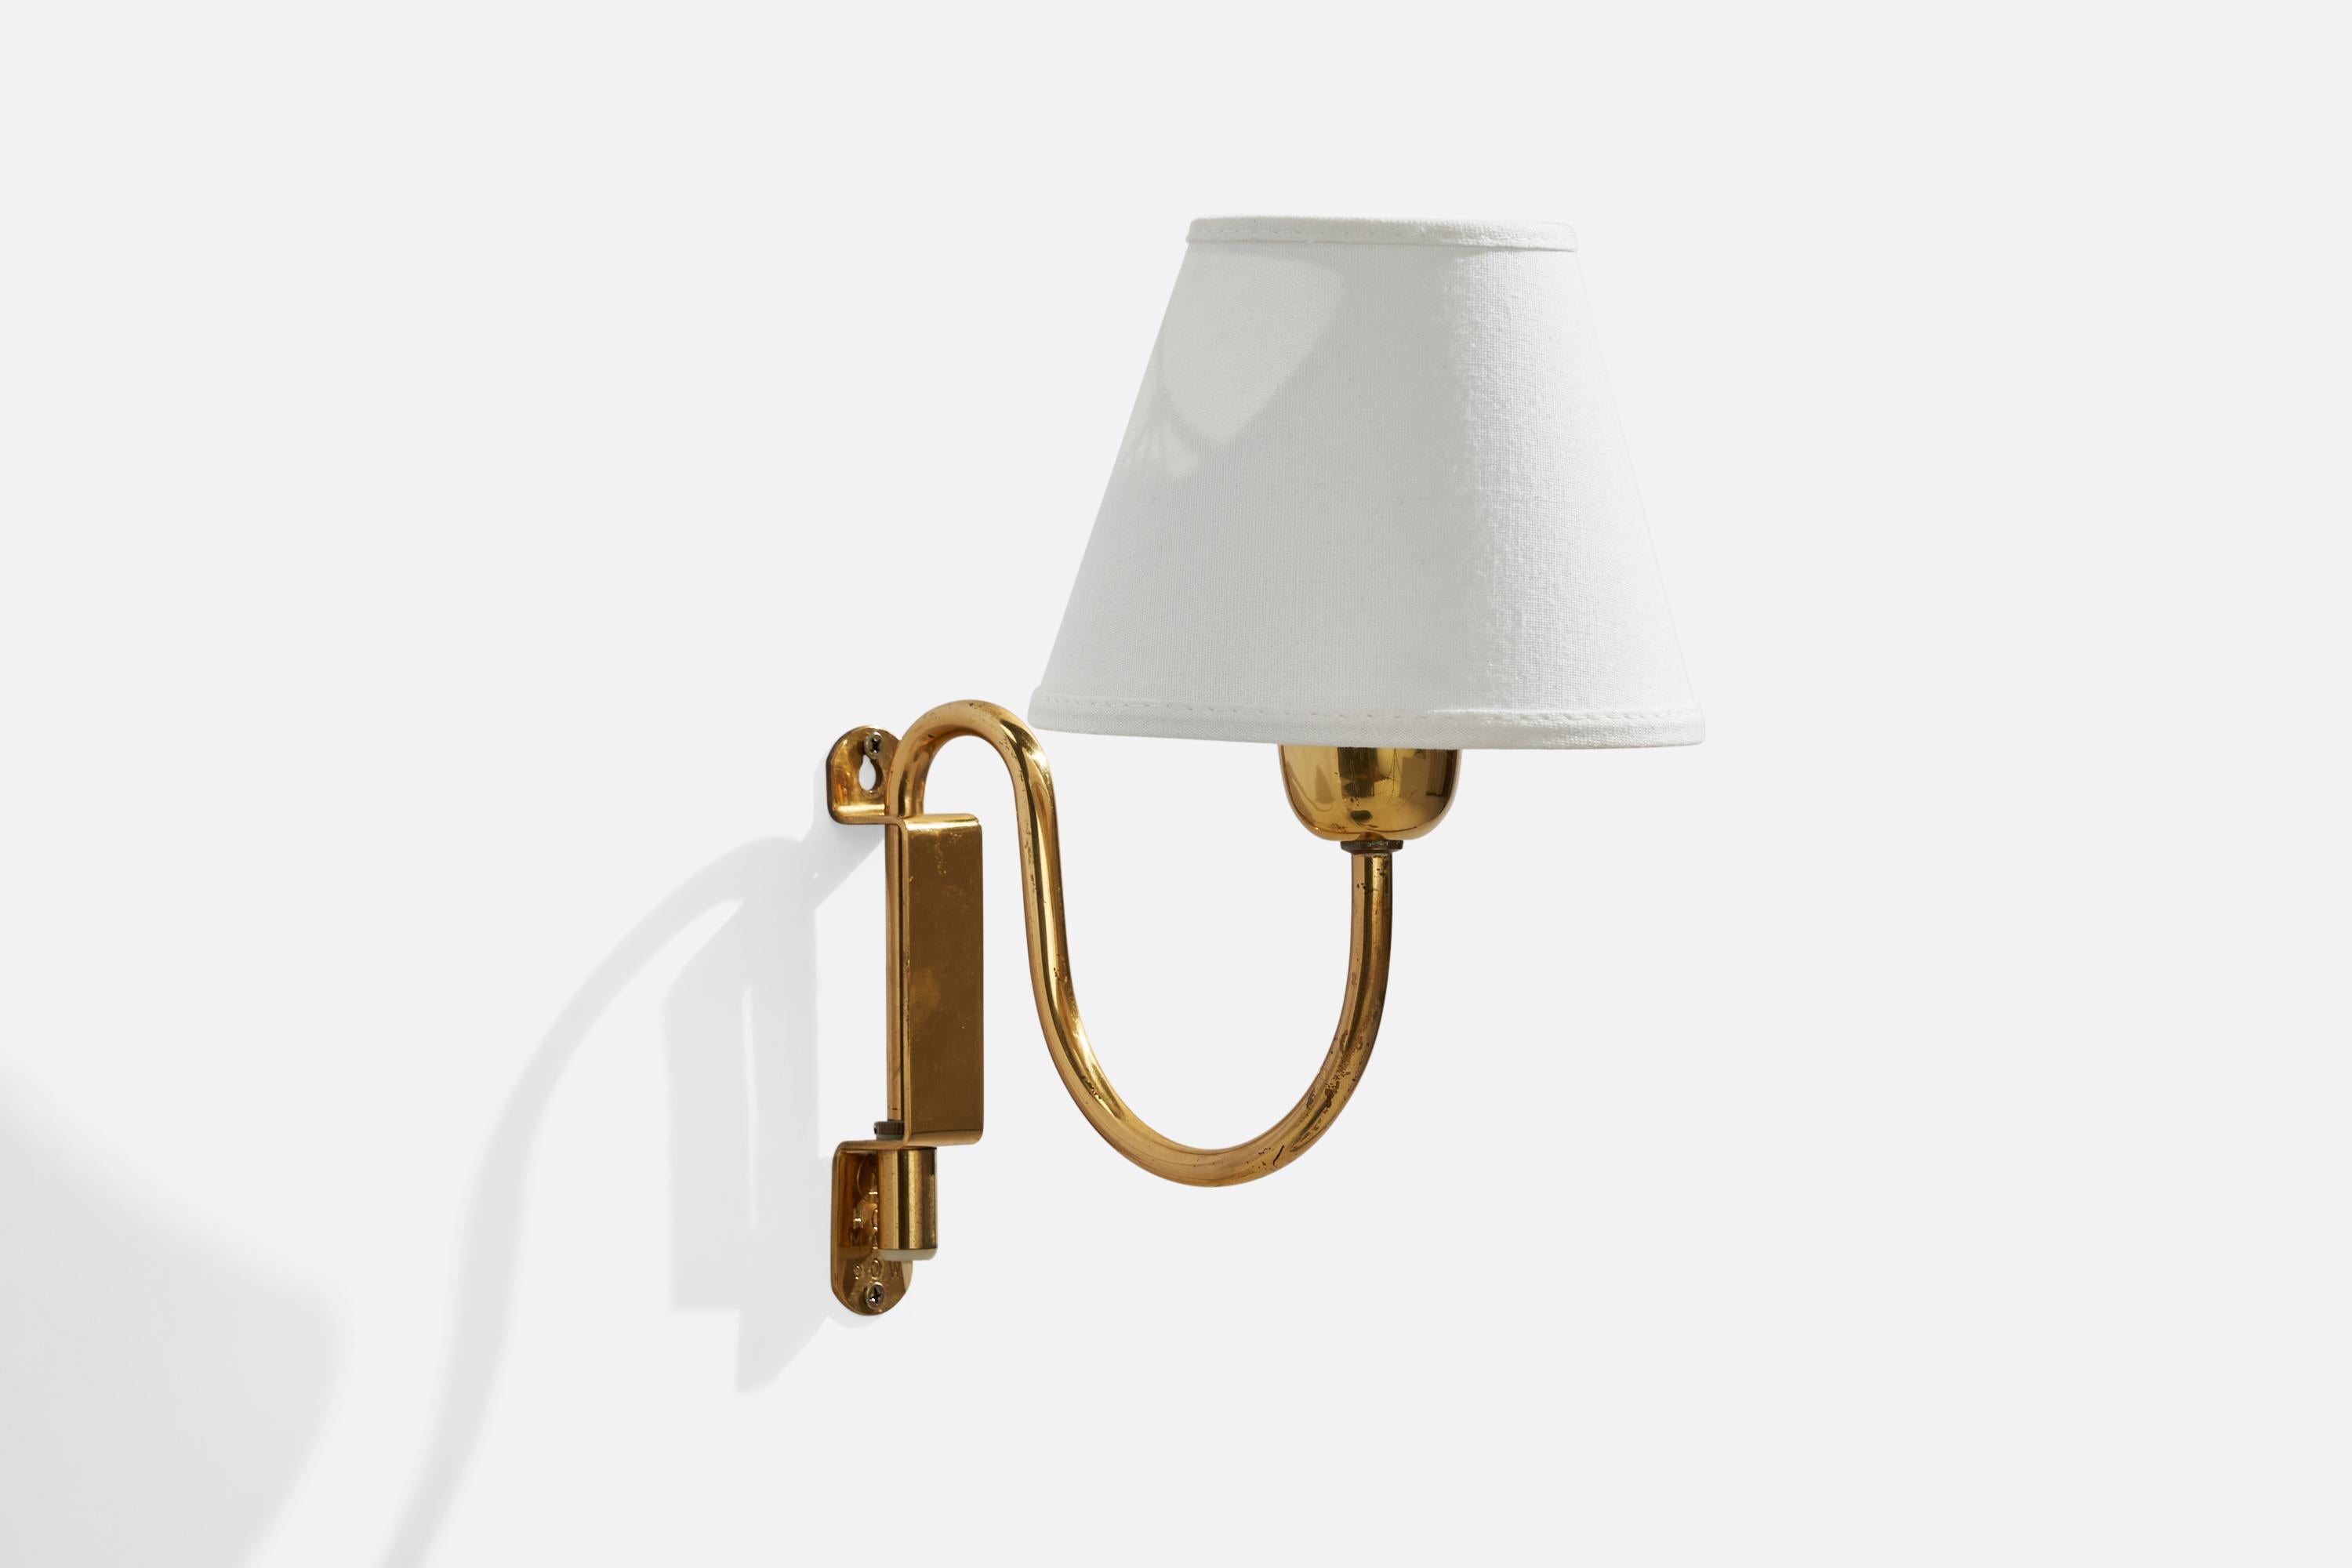 An adjustable brass and white fabric wall light designed and produced in Sweden, 1940s.

Overall Dimensions (inches): 9.5” H x 5.5” W x 9”  D
Back Plate Dimensions (inches): 5” H x 1.0”  W x .25” D
Bulb Specifications: E-26 Bulb
Number of Sockets: